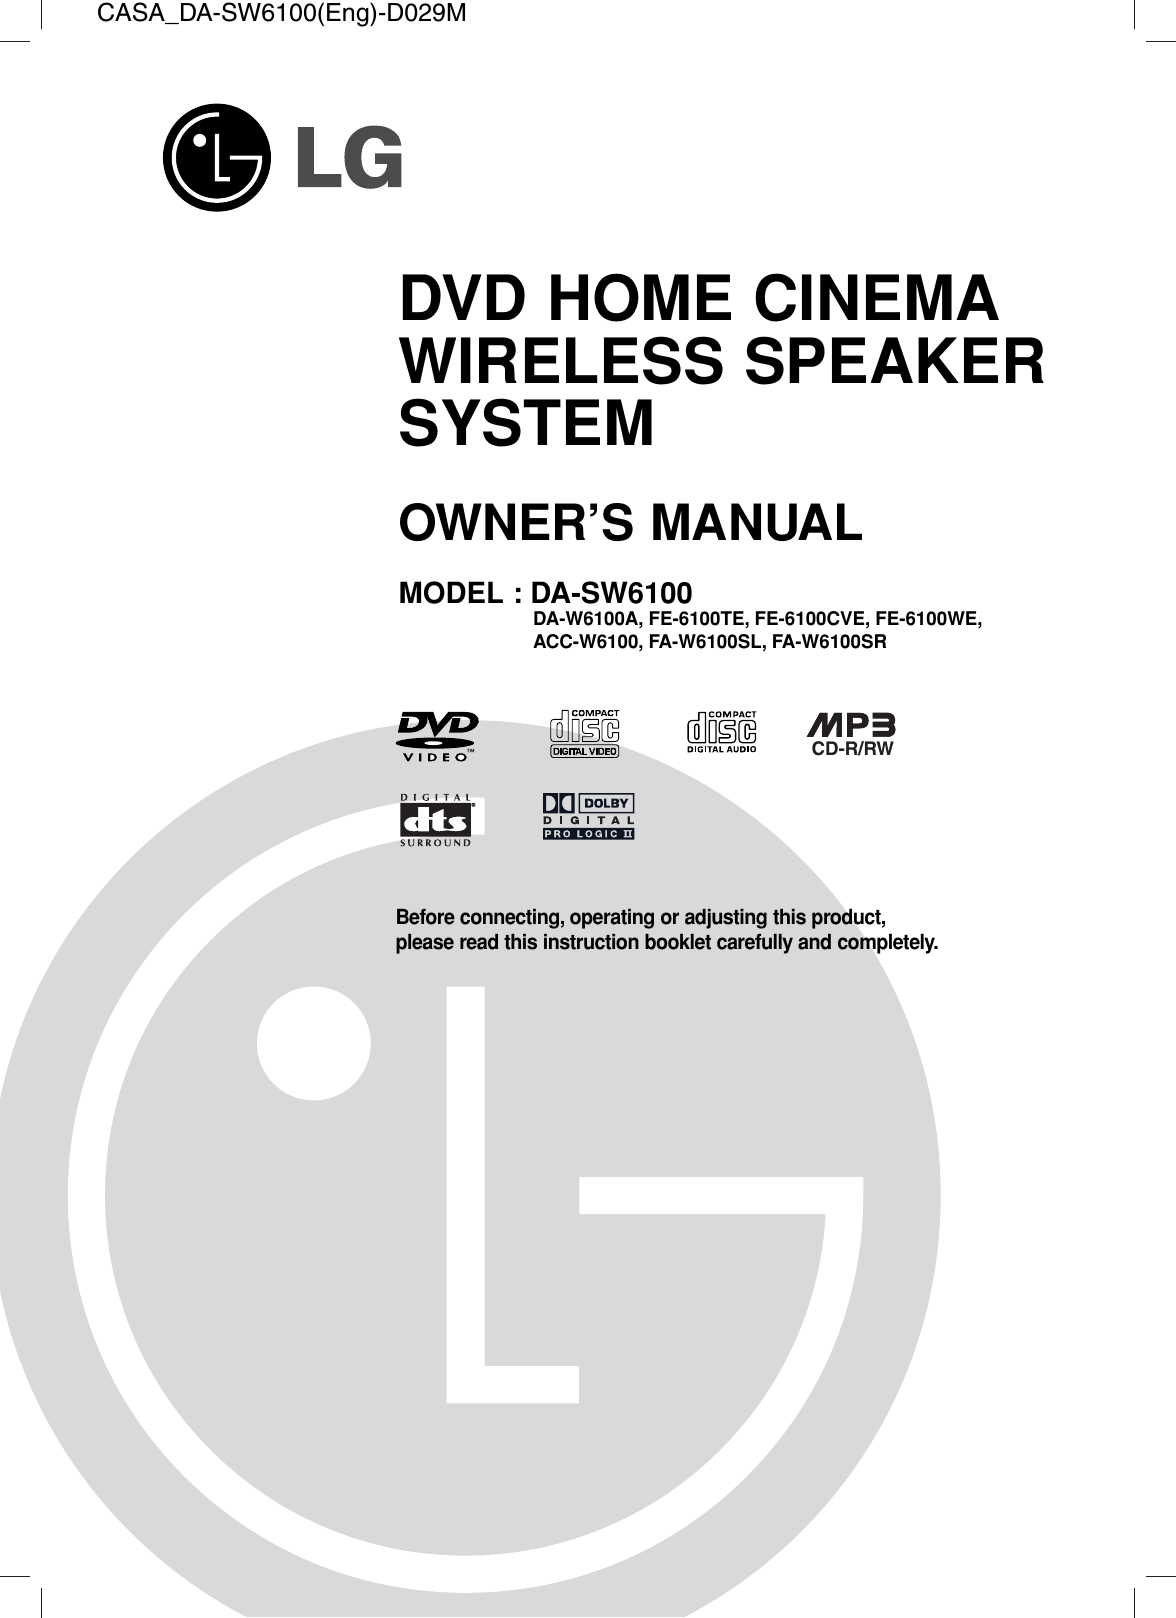 DVD HOME CINEMAWIRELESS SPEAKERSYSTEMOWNER’S MANUALMODEL : DA-SW6100DA-W6100A, FE-6100TE, FE-6100CVE, FE-6100WE,ACC-W6100, FA-W6100SL, FA-W6100SRCD-R/RWCASA_DA-SW6100(Eng)-D029MBefore connecting, operating or adjusting this product,please read this instruction booklet carefully and completely.